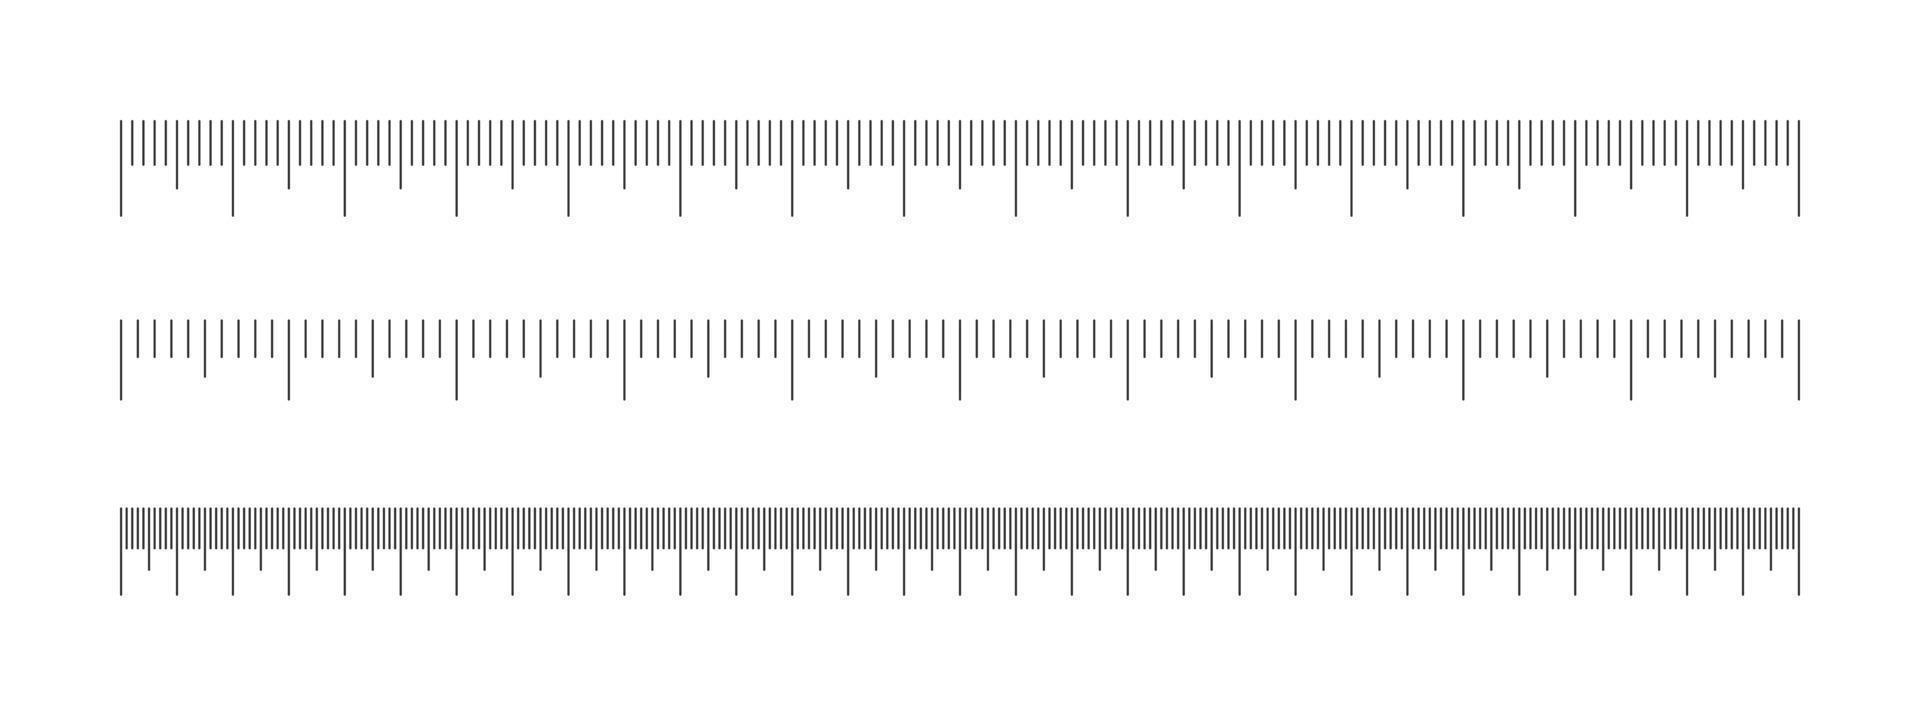 Scale of ruler set. Horizontal measuring chart with centimeters and millimeters markup. Distance, height or length measurement tool vector